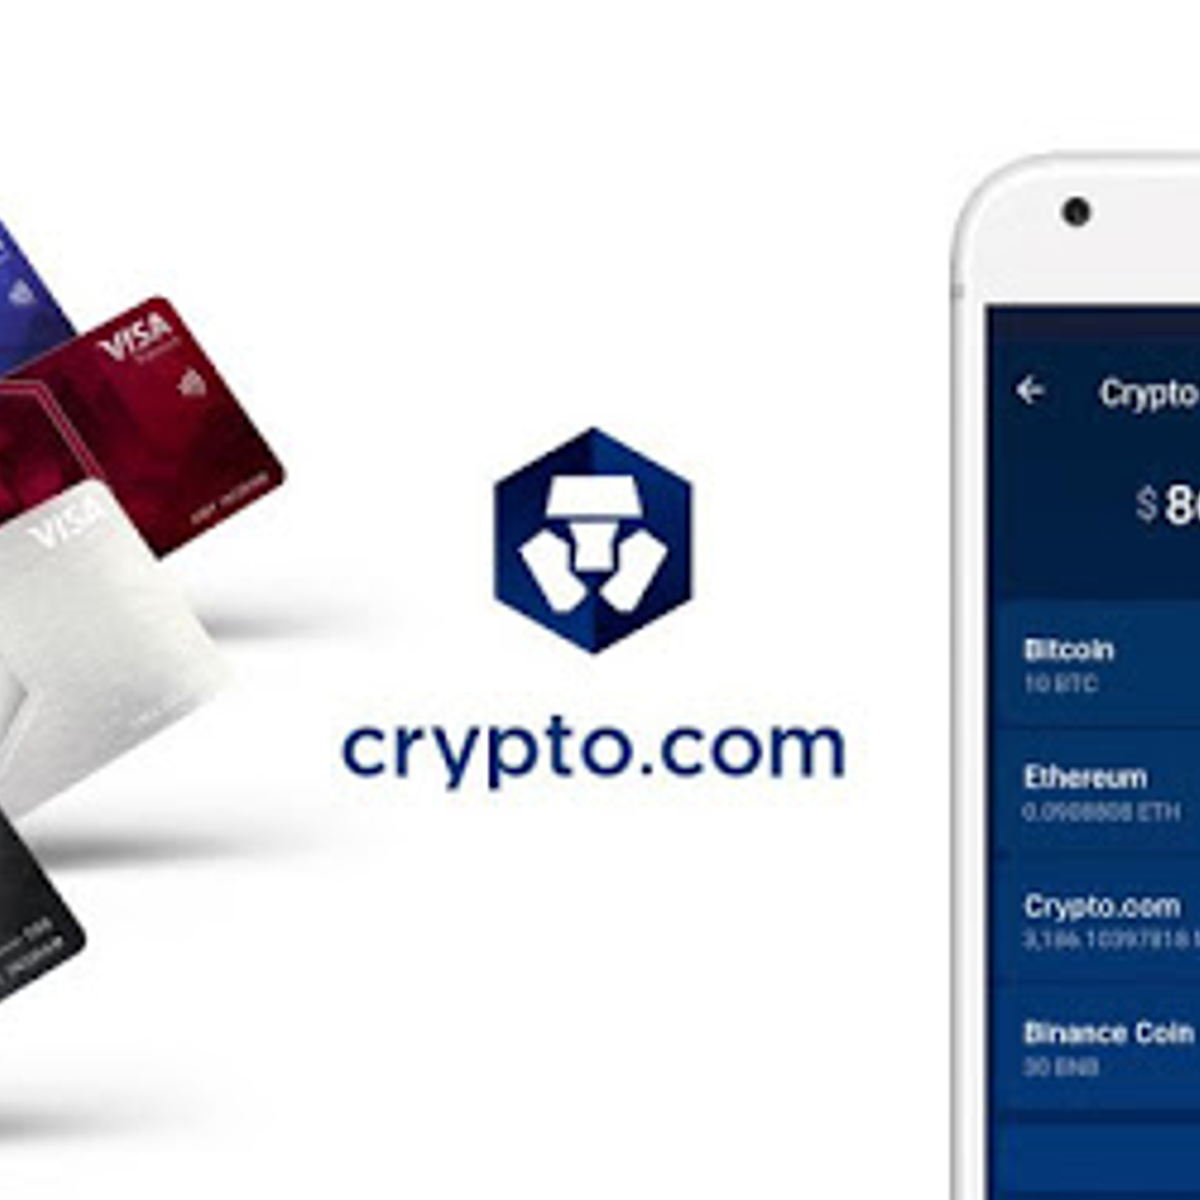 Cryptocom app download for pc information